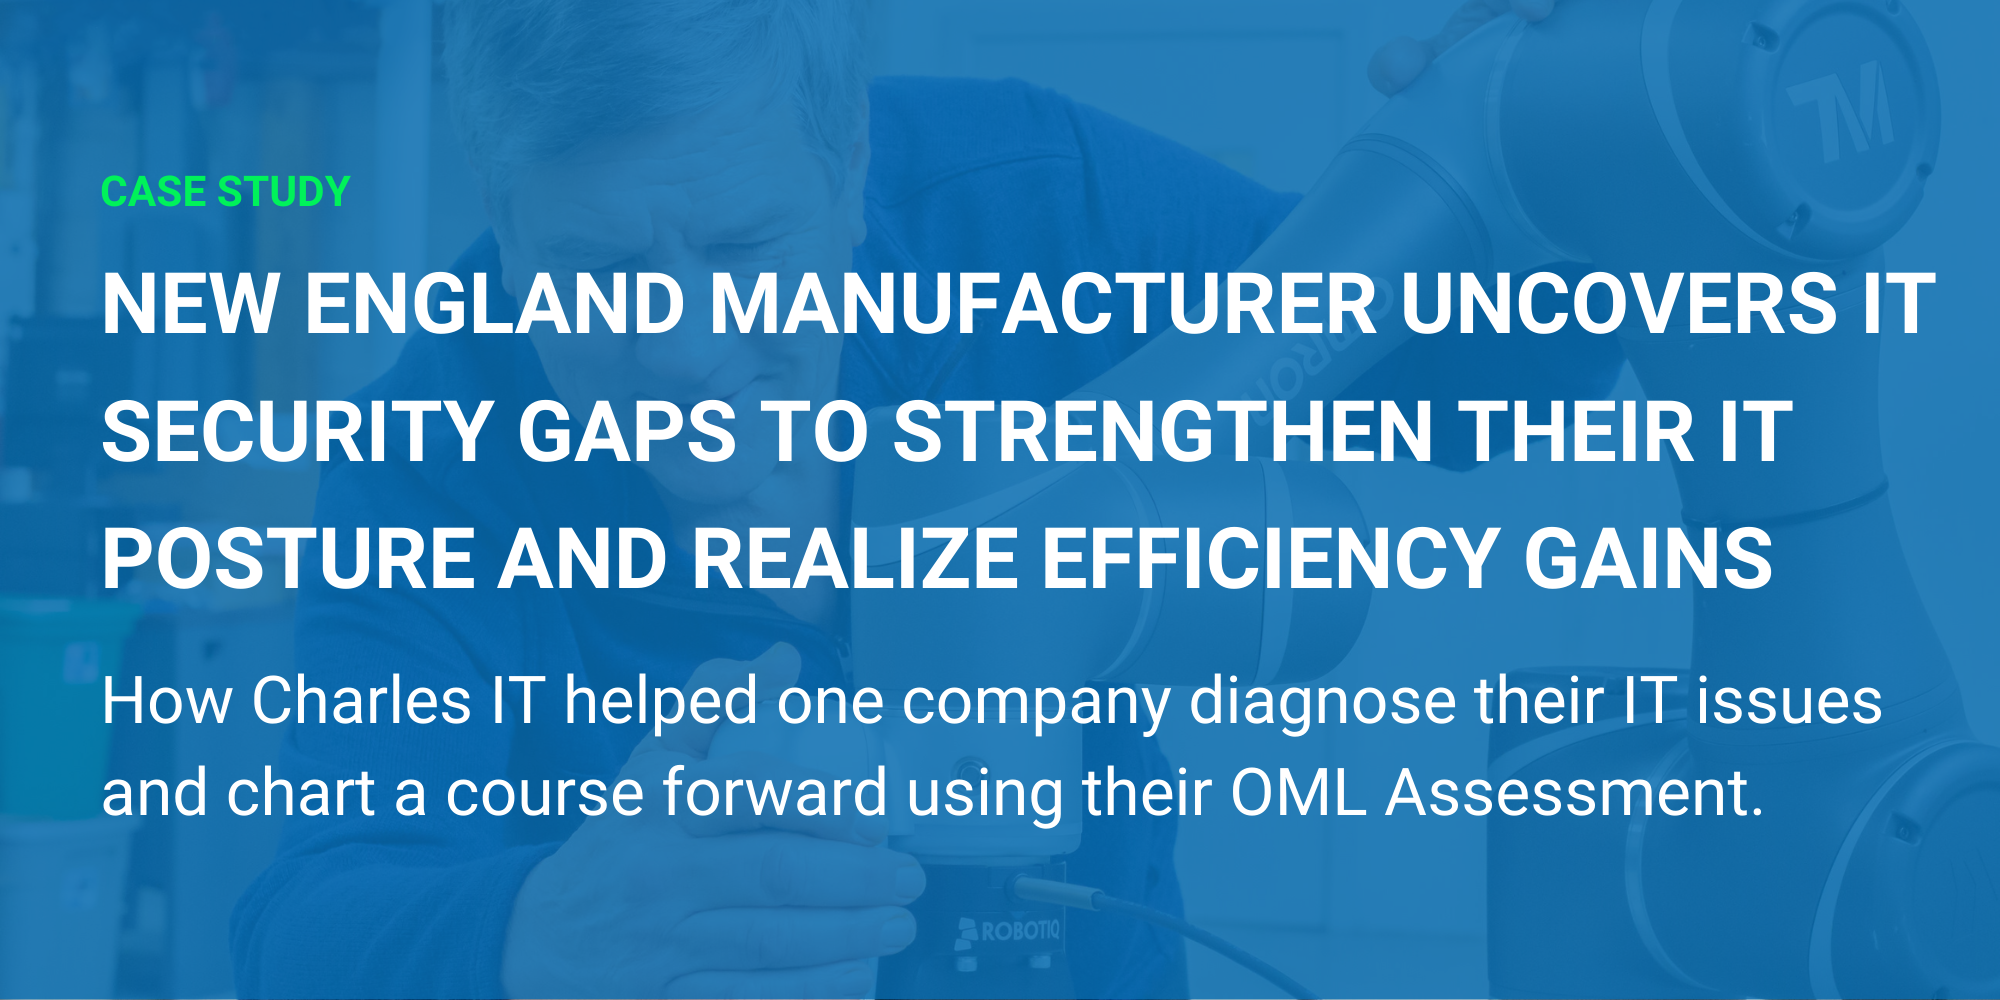 New England Manufacturer Uncovers IT Security Gaps to Strengthen Their IT Posture and Realize Efficiency Gains